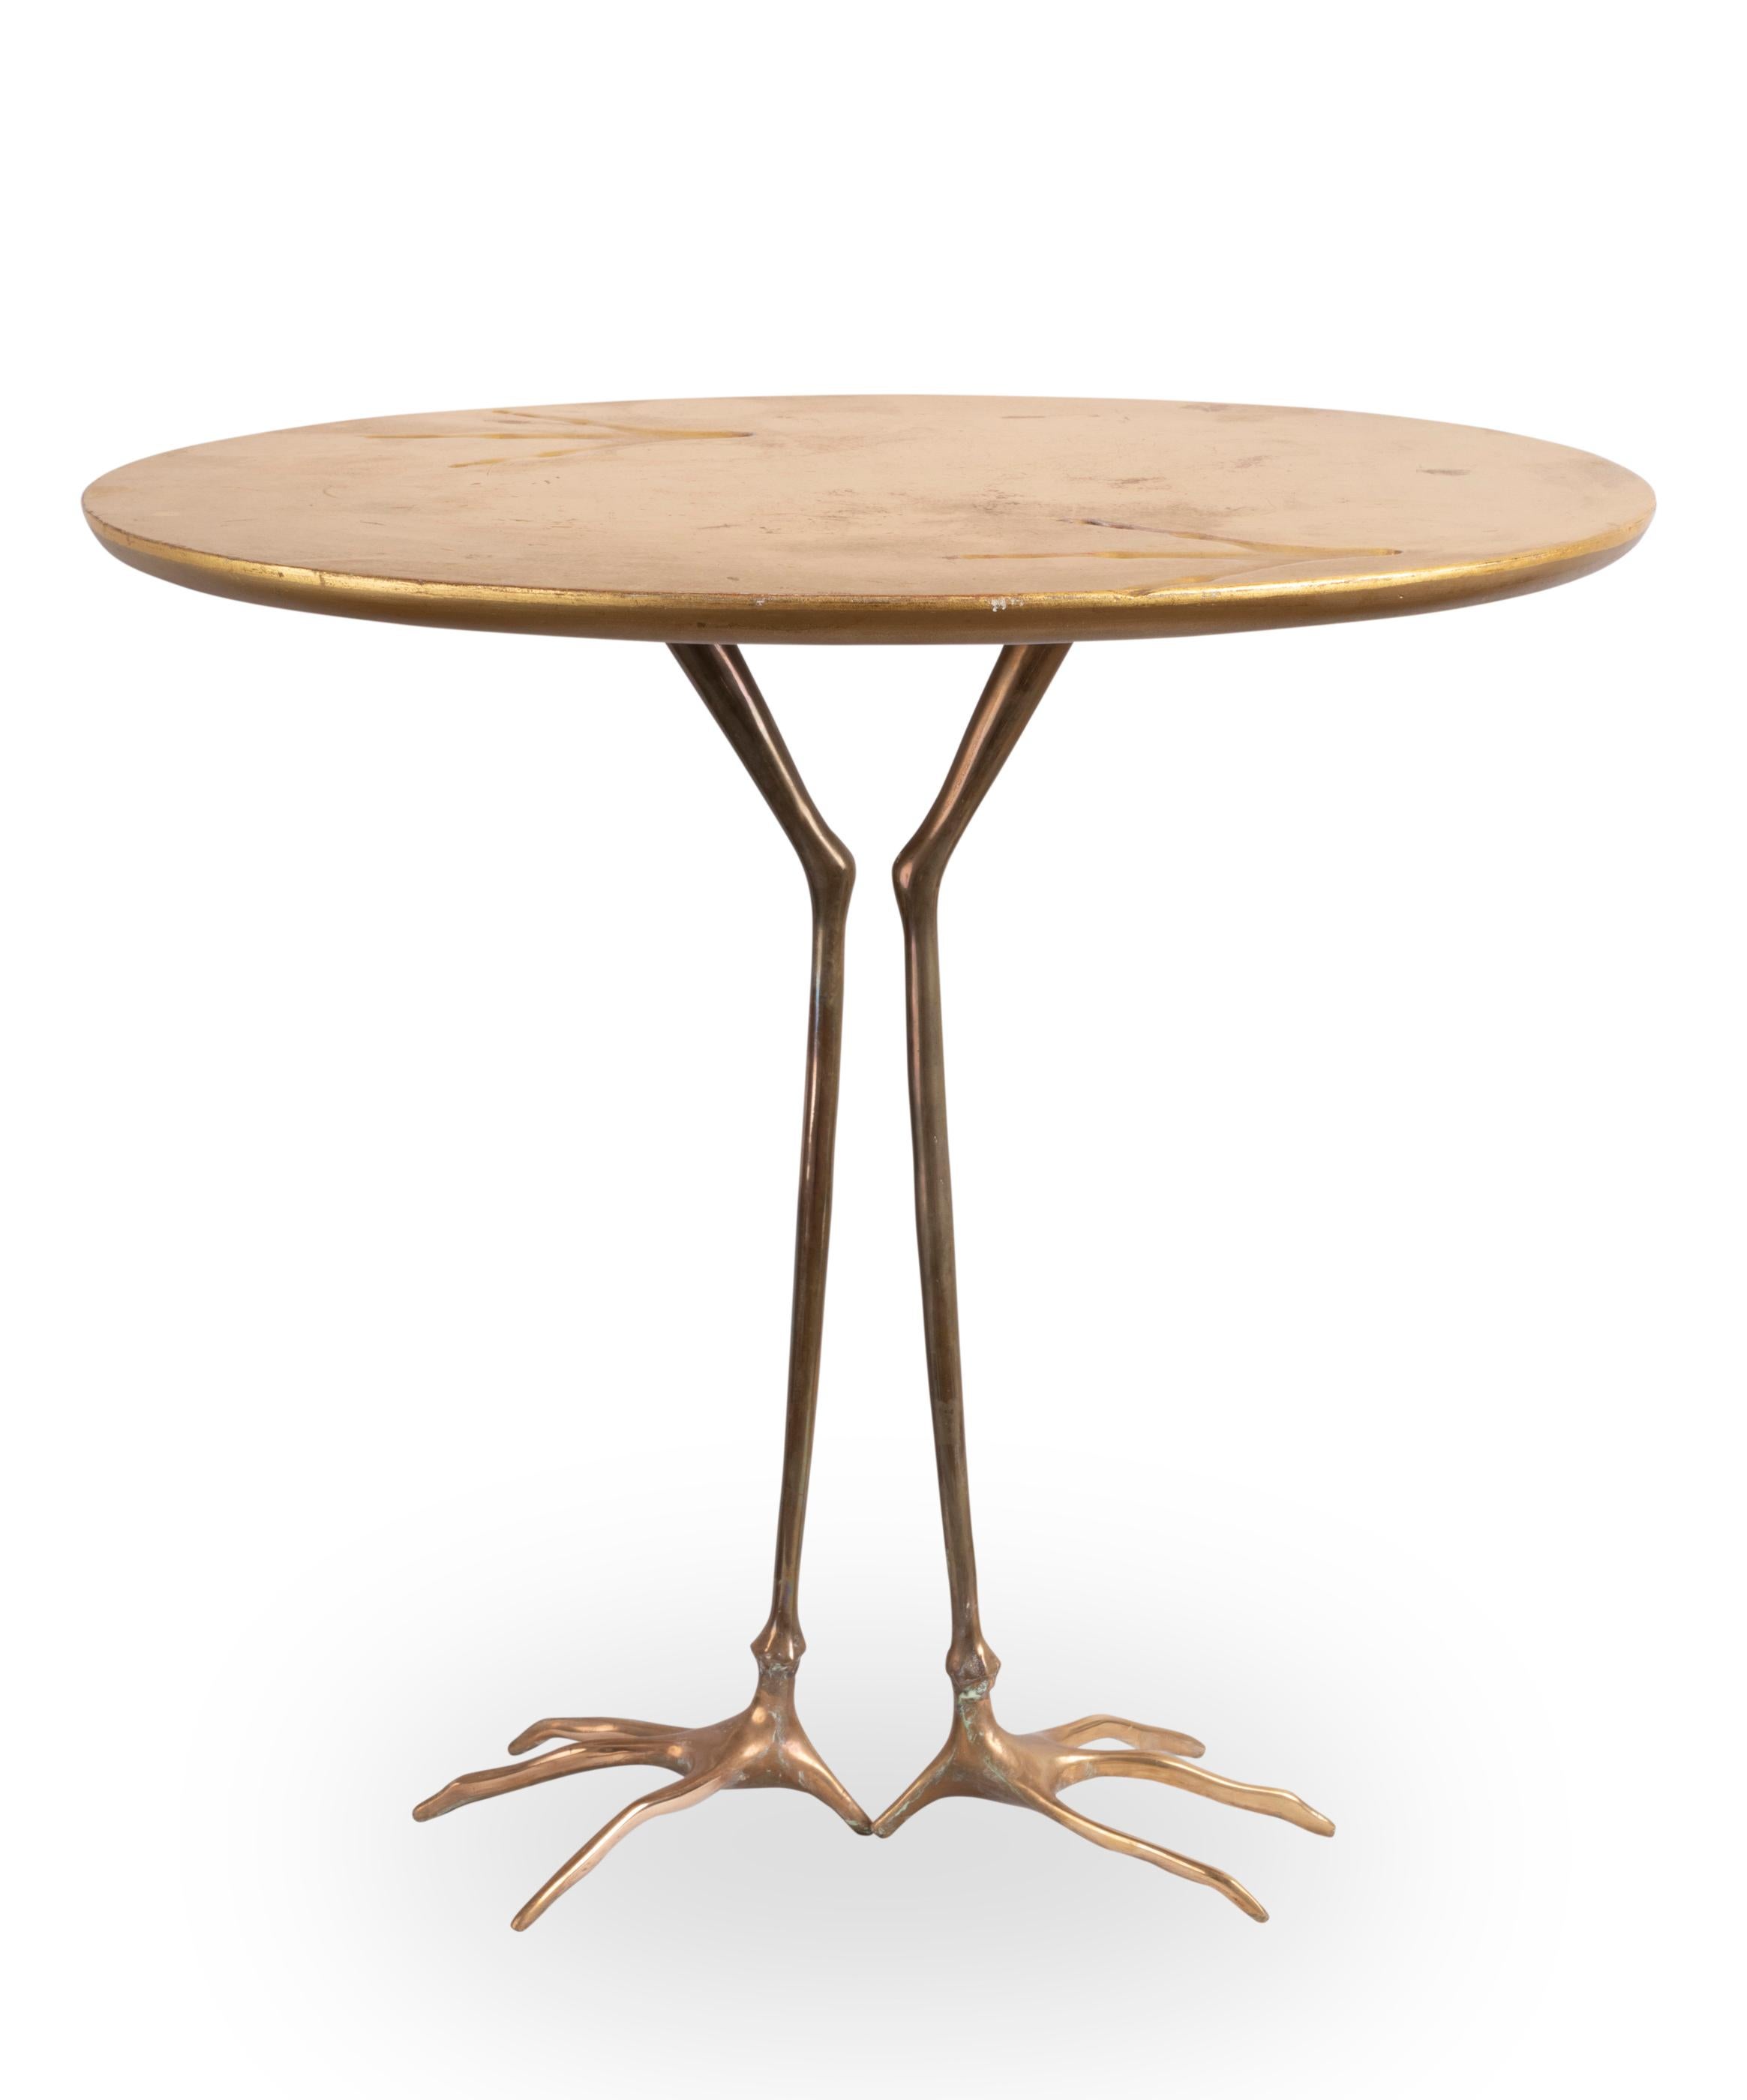 Traccia table designed by Meret Oppenheim
Bronze feet, oval gilded wood top showing birds foot prints.
Designed by Meret Oppenheim in 1939
Edited by Simon Gavina from 1971

Measures: Height 64 cm (26.2 inches)
Length 67.5 cm (26.6 inches)